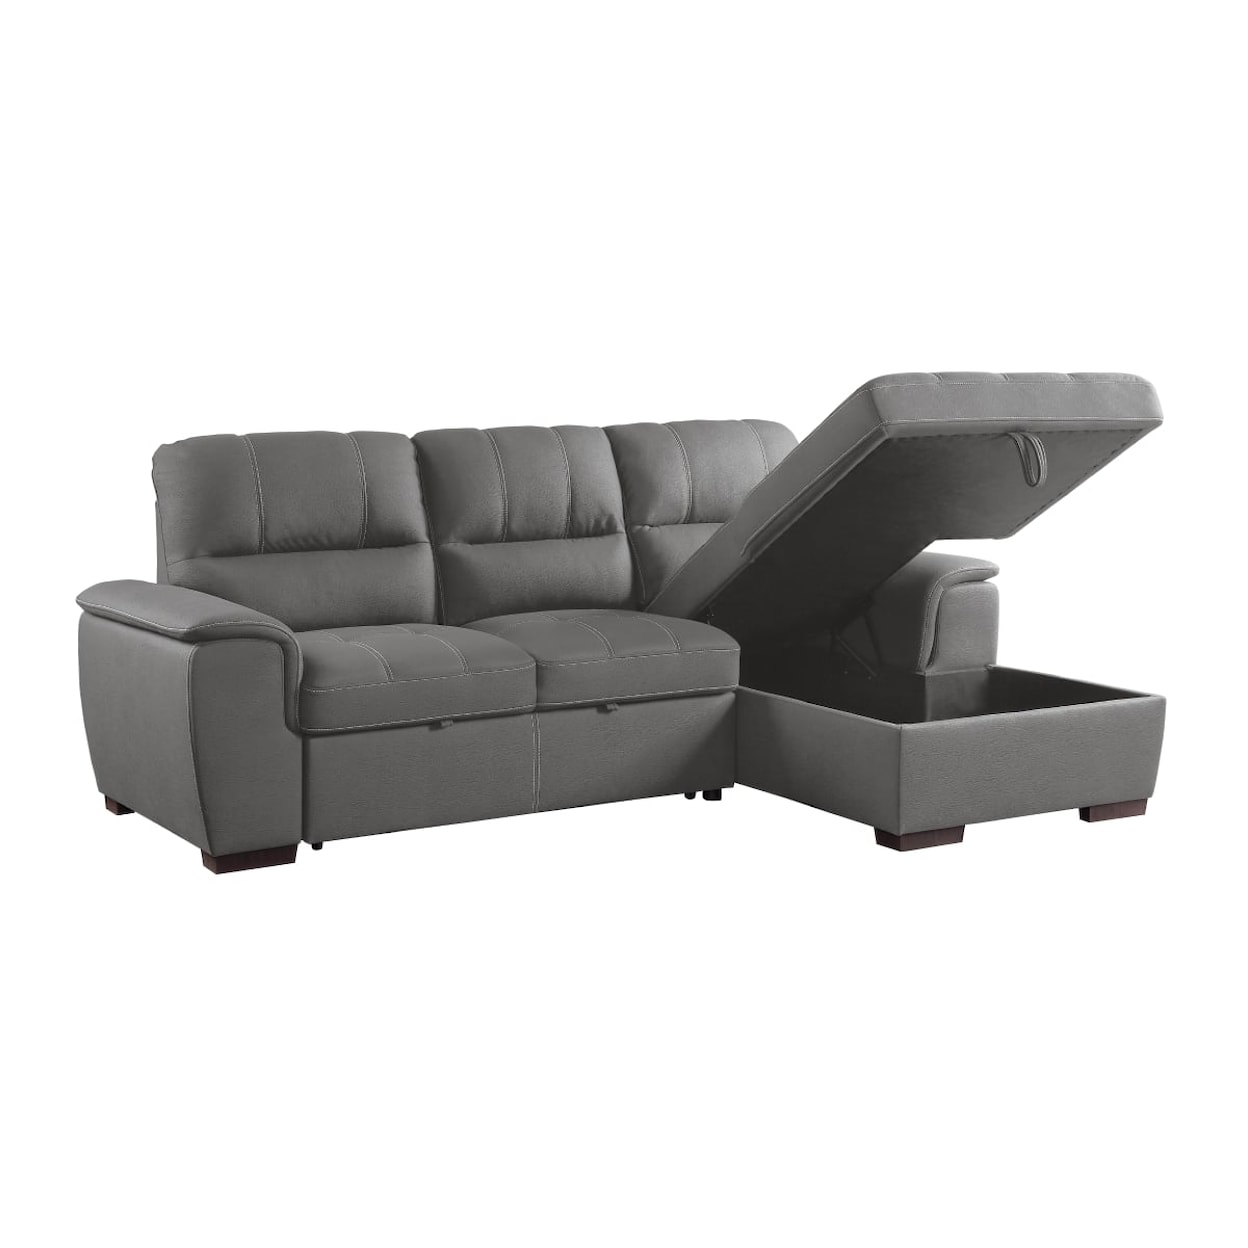 Homelegance Andes 2-Piece Sectional Sofa